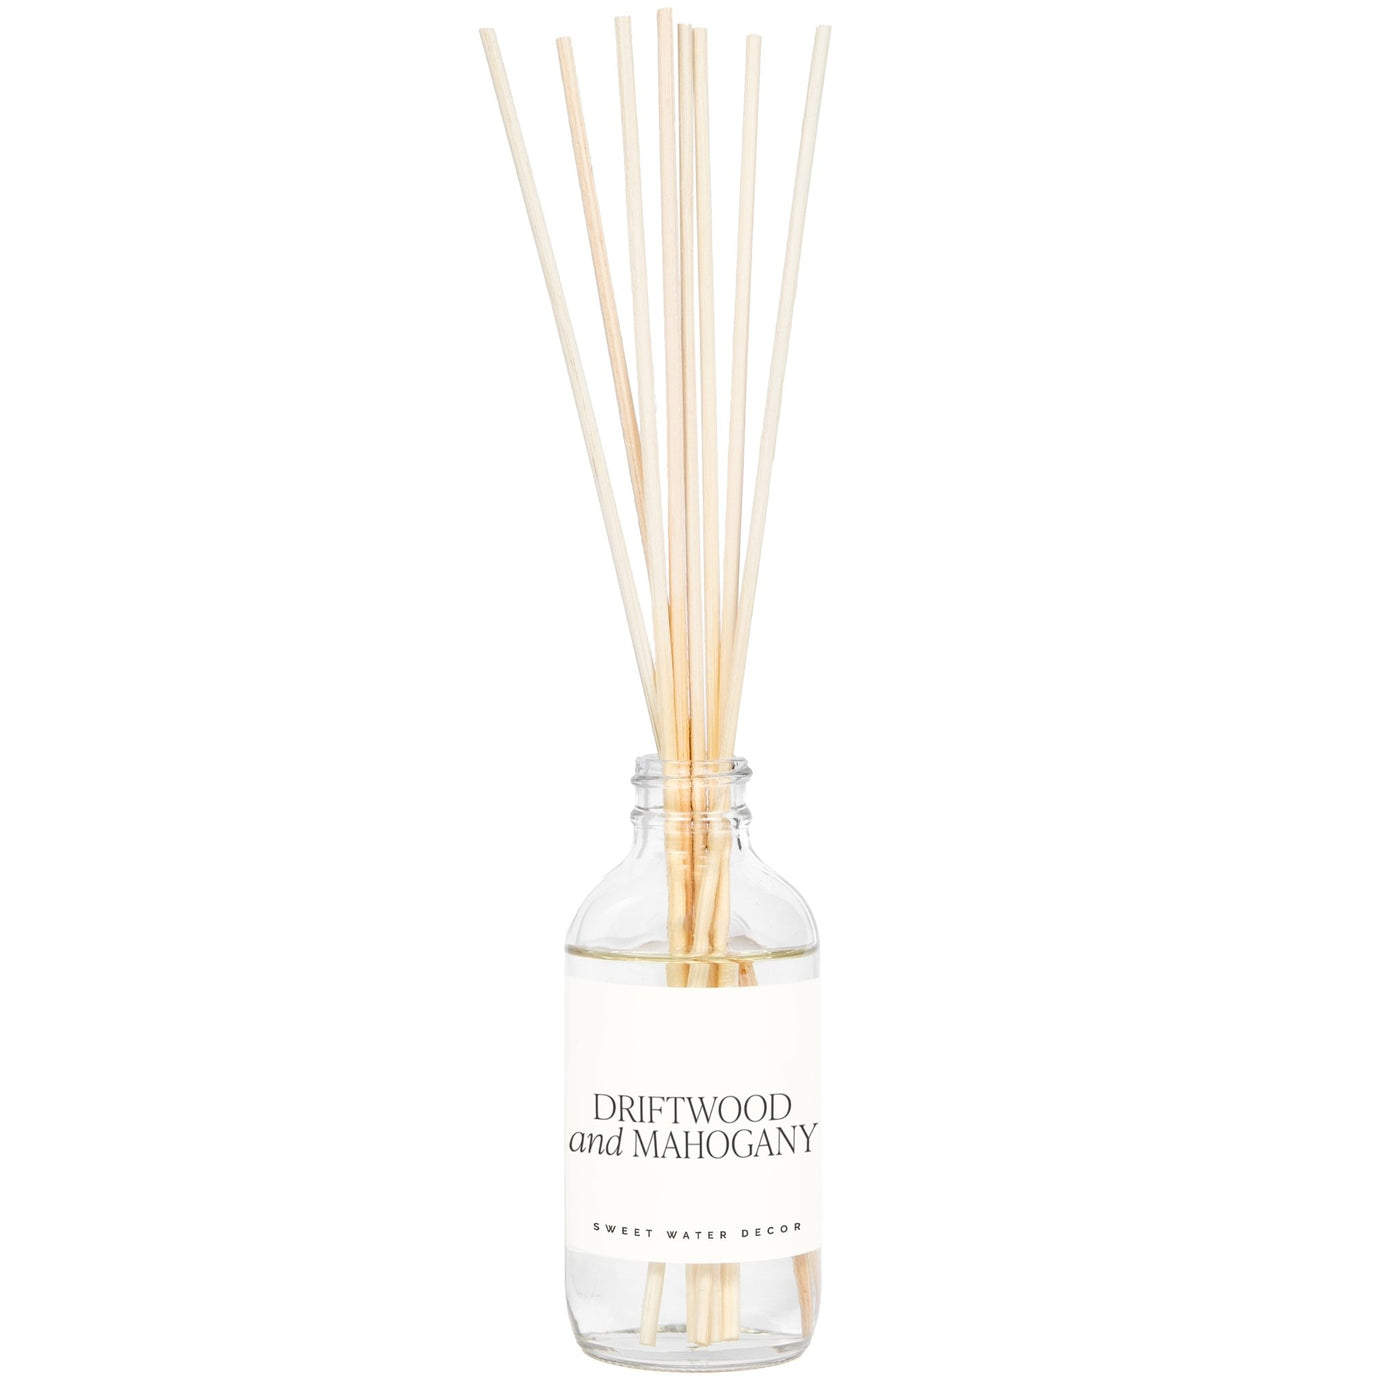 Driftwood and Mahogany Clear Reed Diffuser - Sweet Water Decor - Reed Diffusers